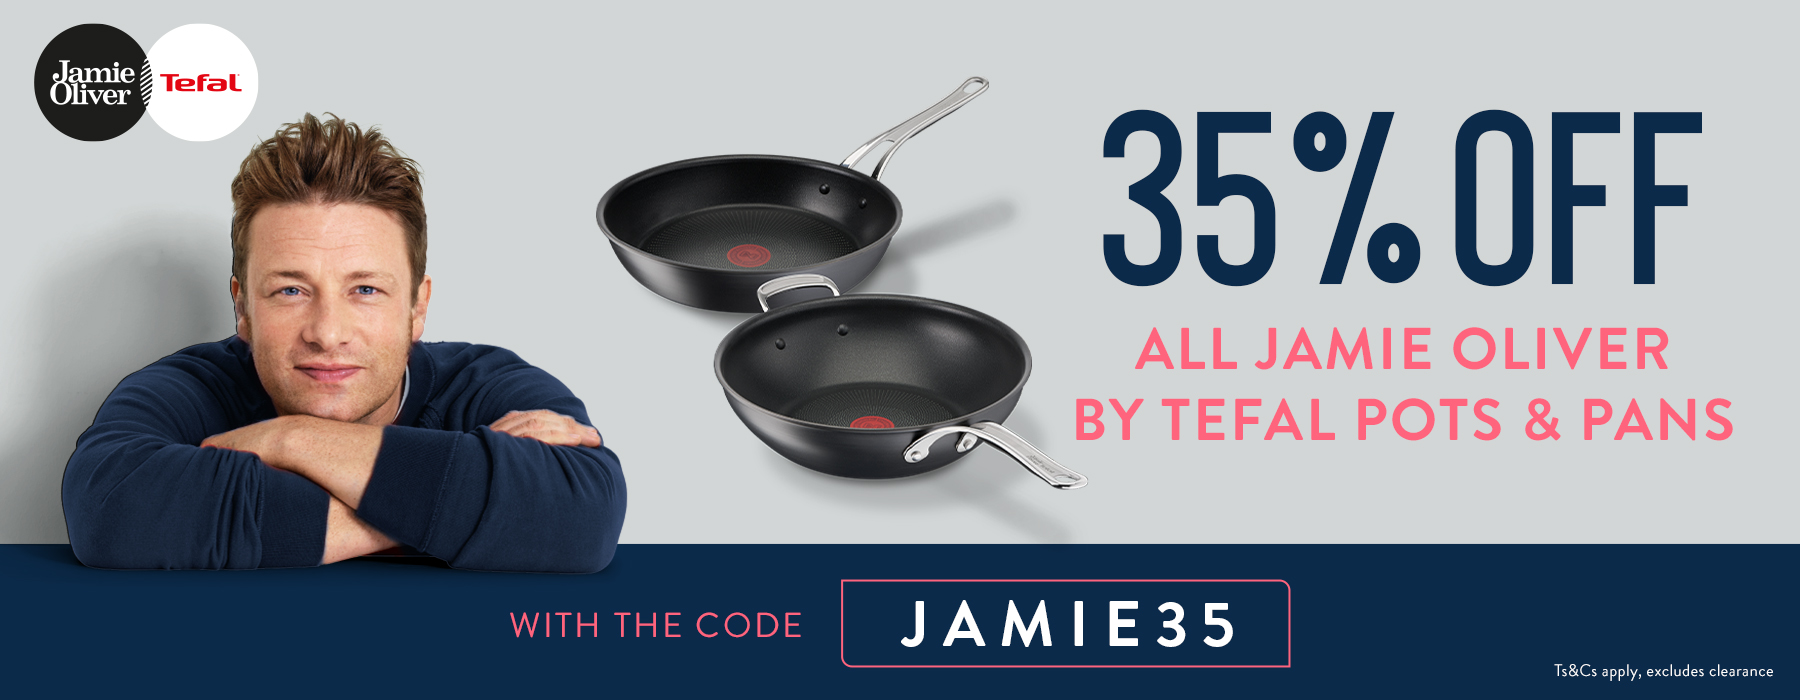 cate-promo-banner-35% Off Jamie Oliver